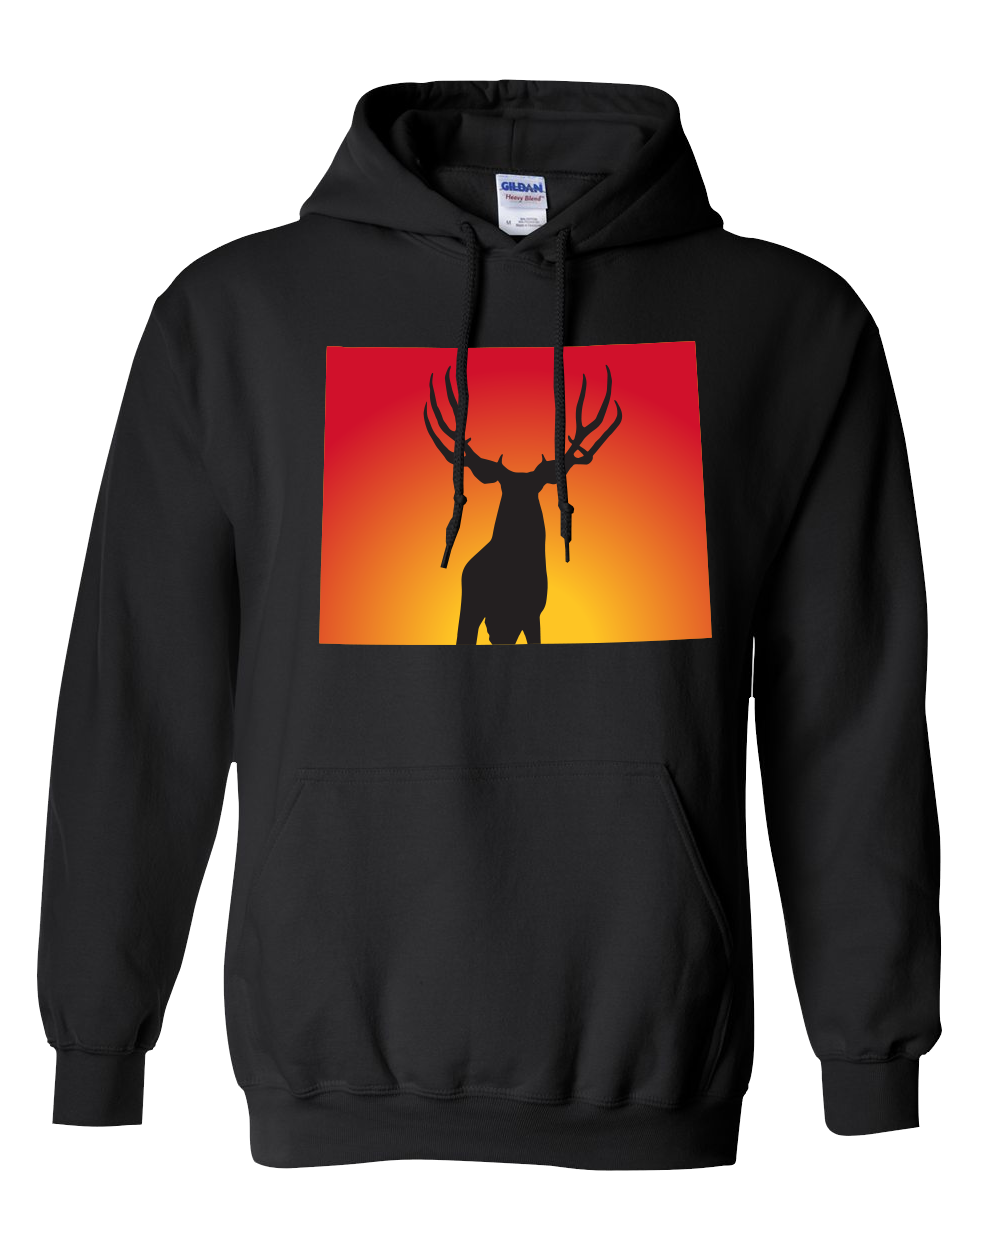 Pullover Hooded Sweatshirt Wyoming Black Mule Deer Vibrant Design High Quality Tight Knit Ring Spun Low Maintenance Cotton Printed With The Newest Available Color Transfer Technology